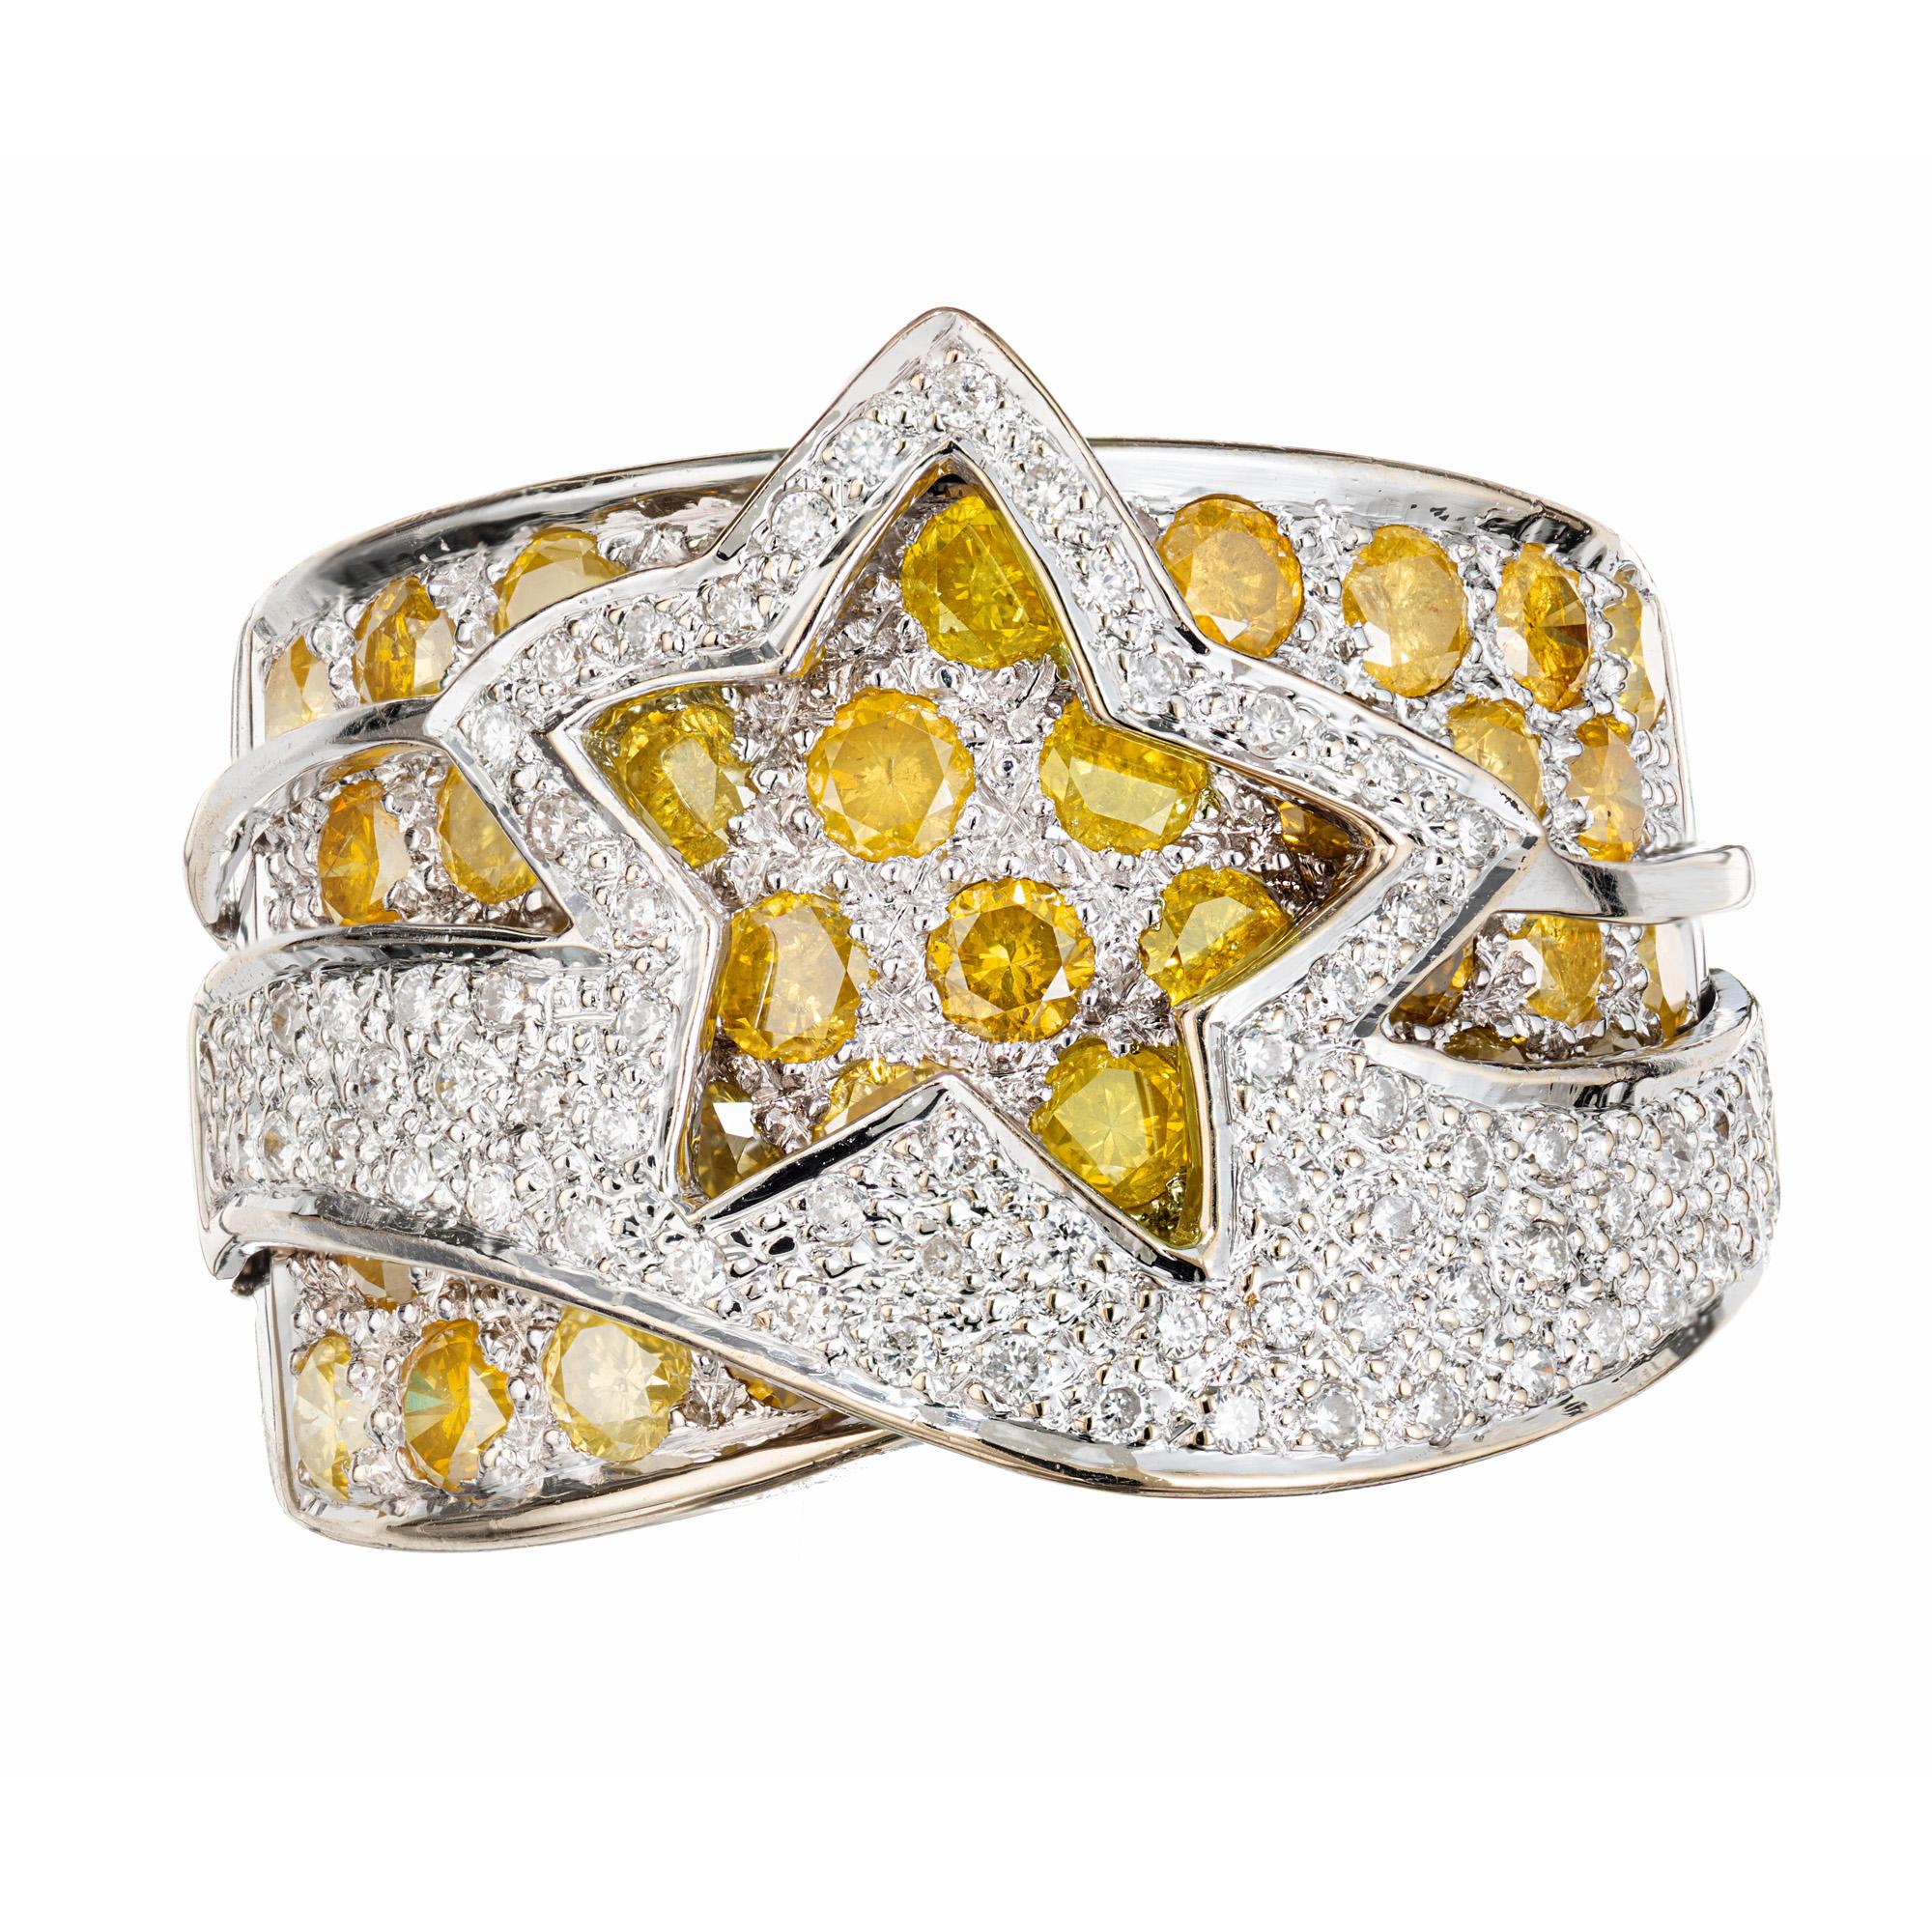 Boldly styled Le Vian star design band cocktail ring. 38 round yellow diamonds approximately 2.00cts set in a 18k white gold wide band with an overlay star design halo set with 67 round pave set diamonds. This intricate and beautifully cocktail